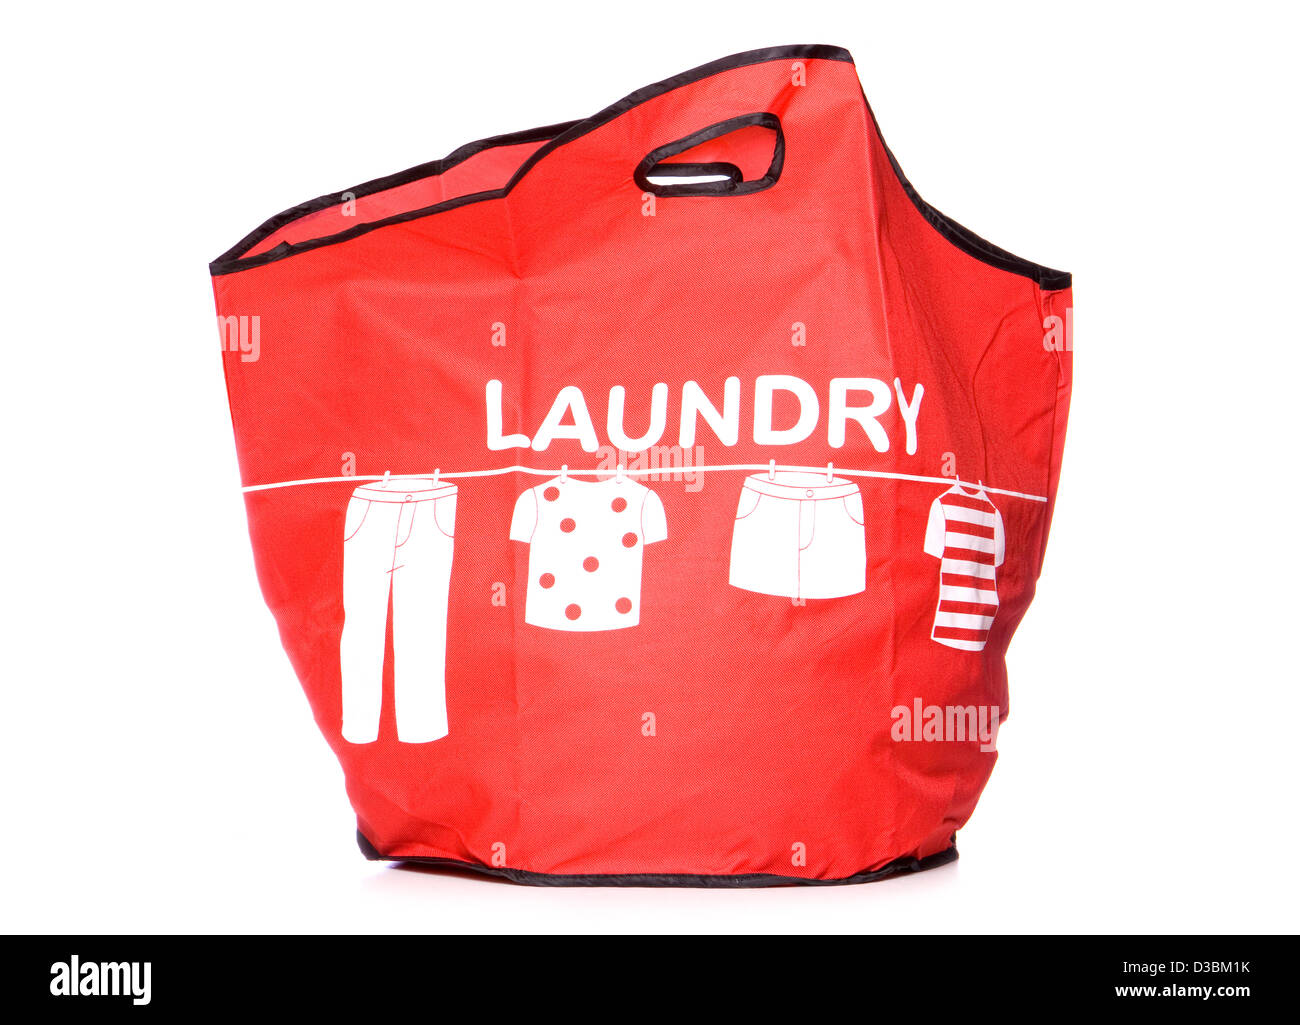 red Laundry carry bag studio cut out Stock Photo